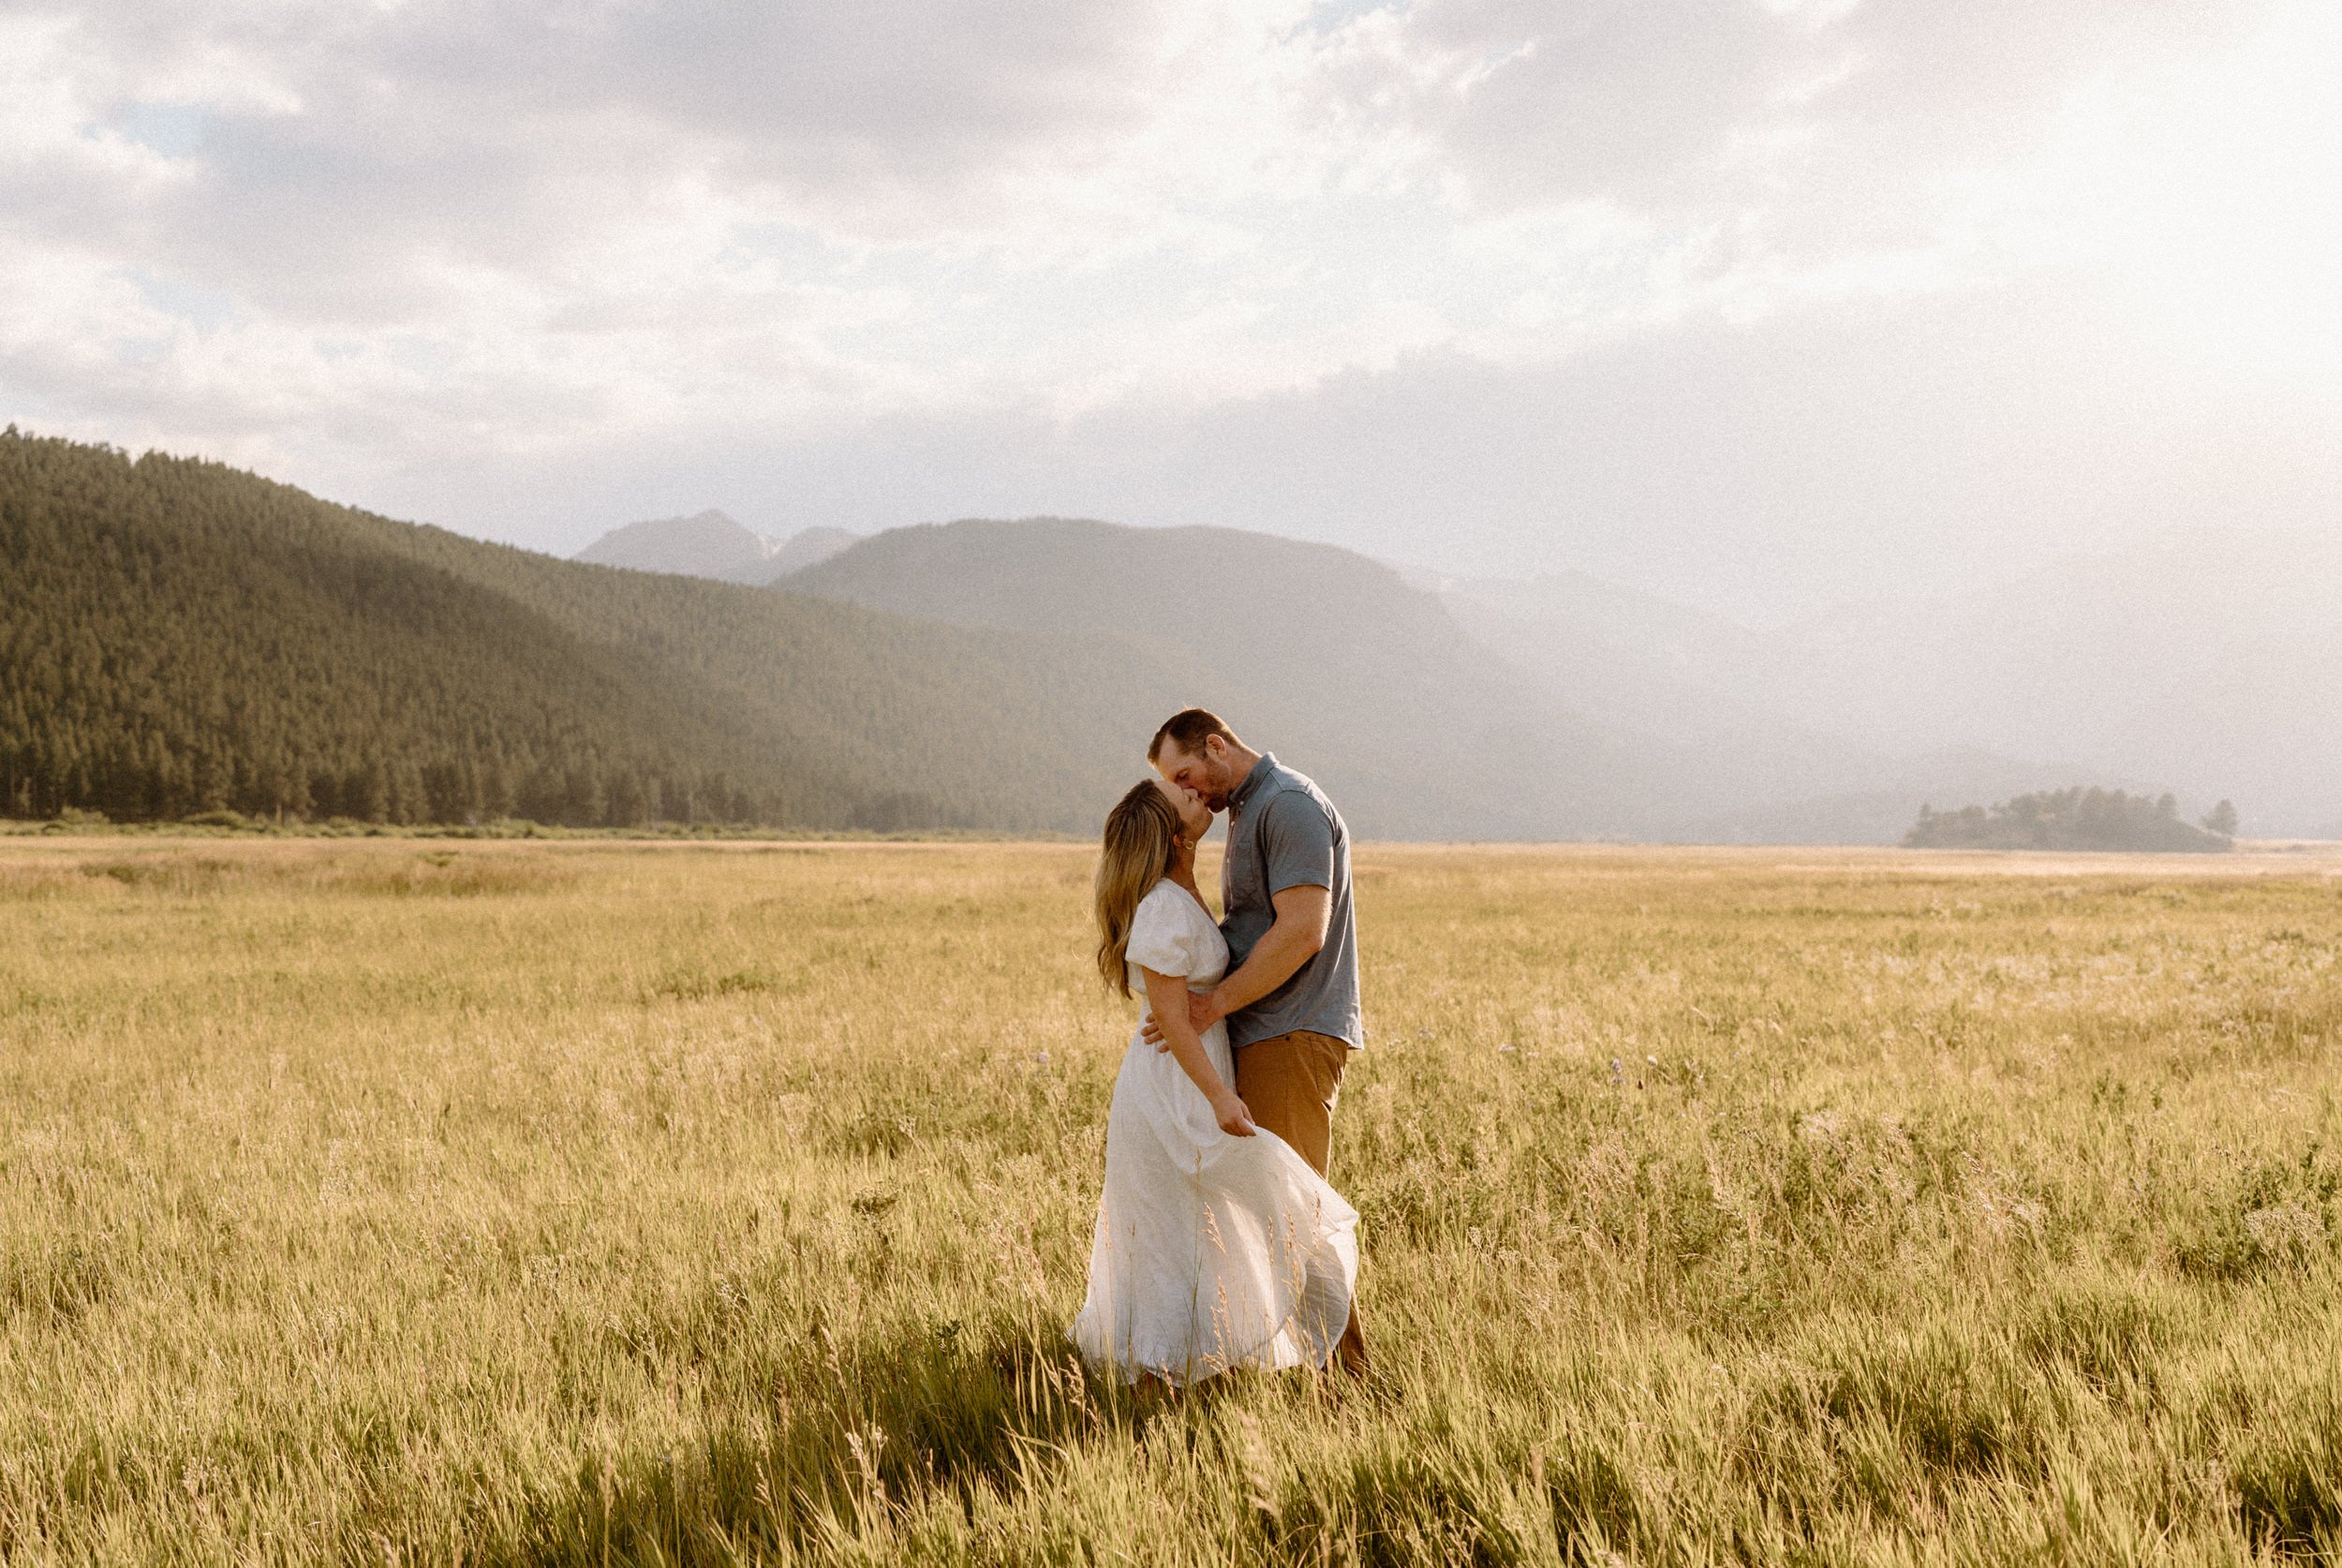 Man and woman kiss in a meadow in Rocky Mountain National Park